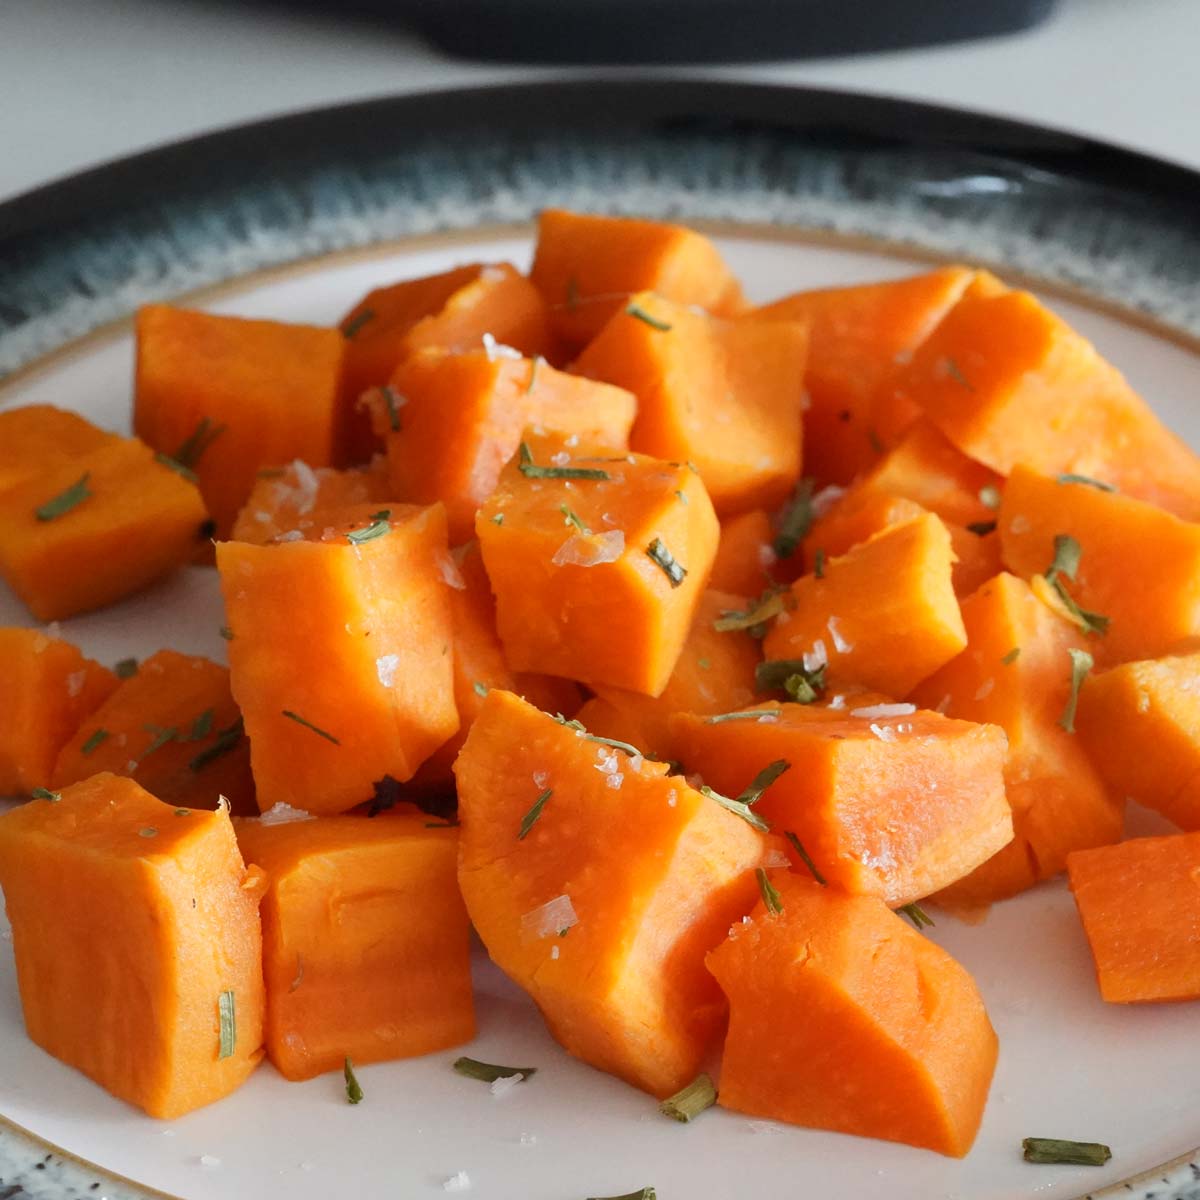 Instant Pot Sweet Potatoes (Cubed) - A Pressure Cooker Kitchen